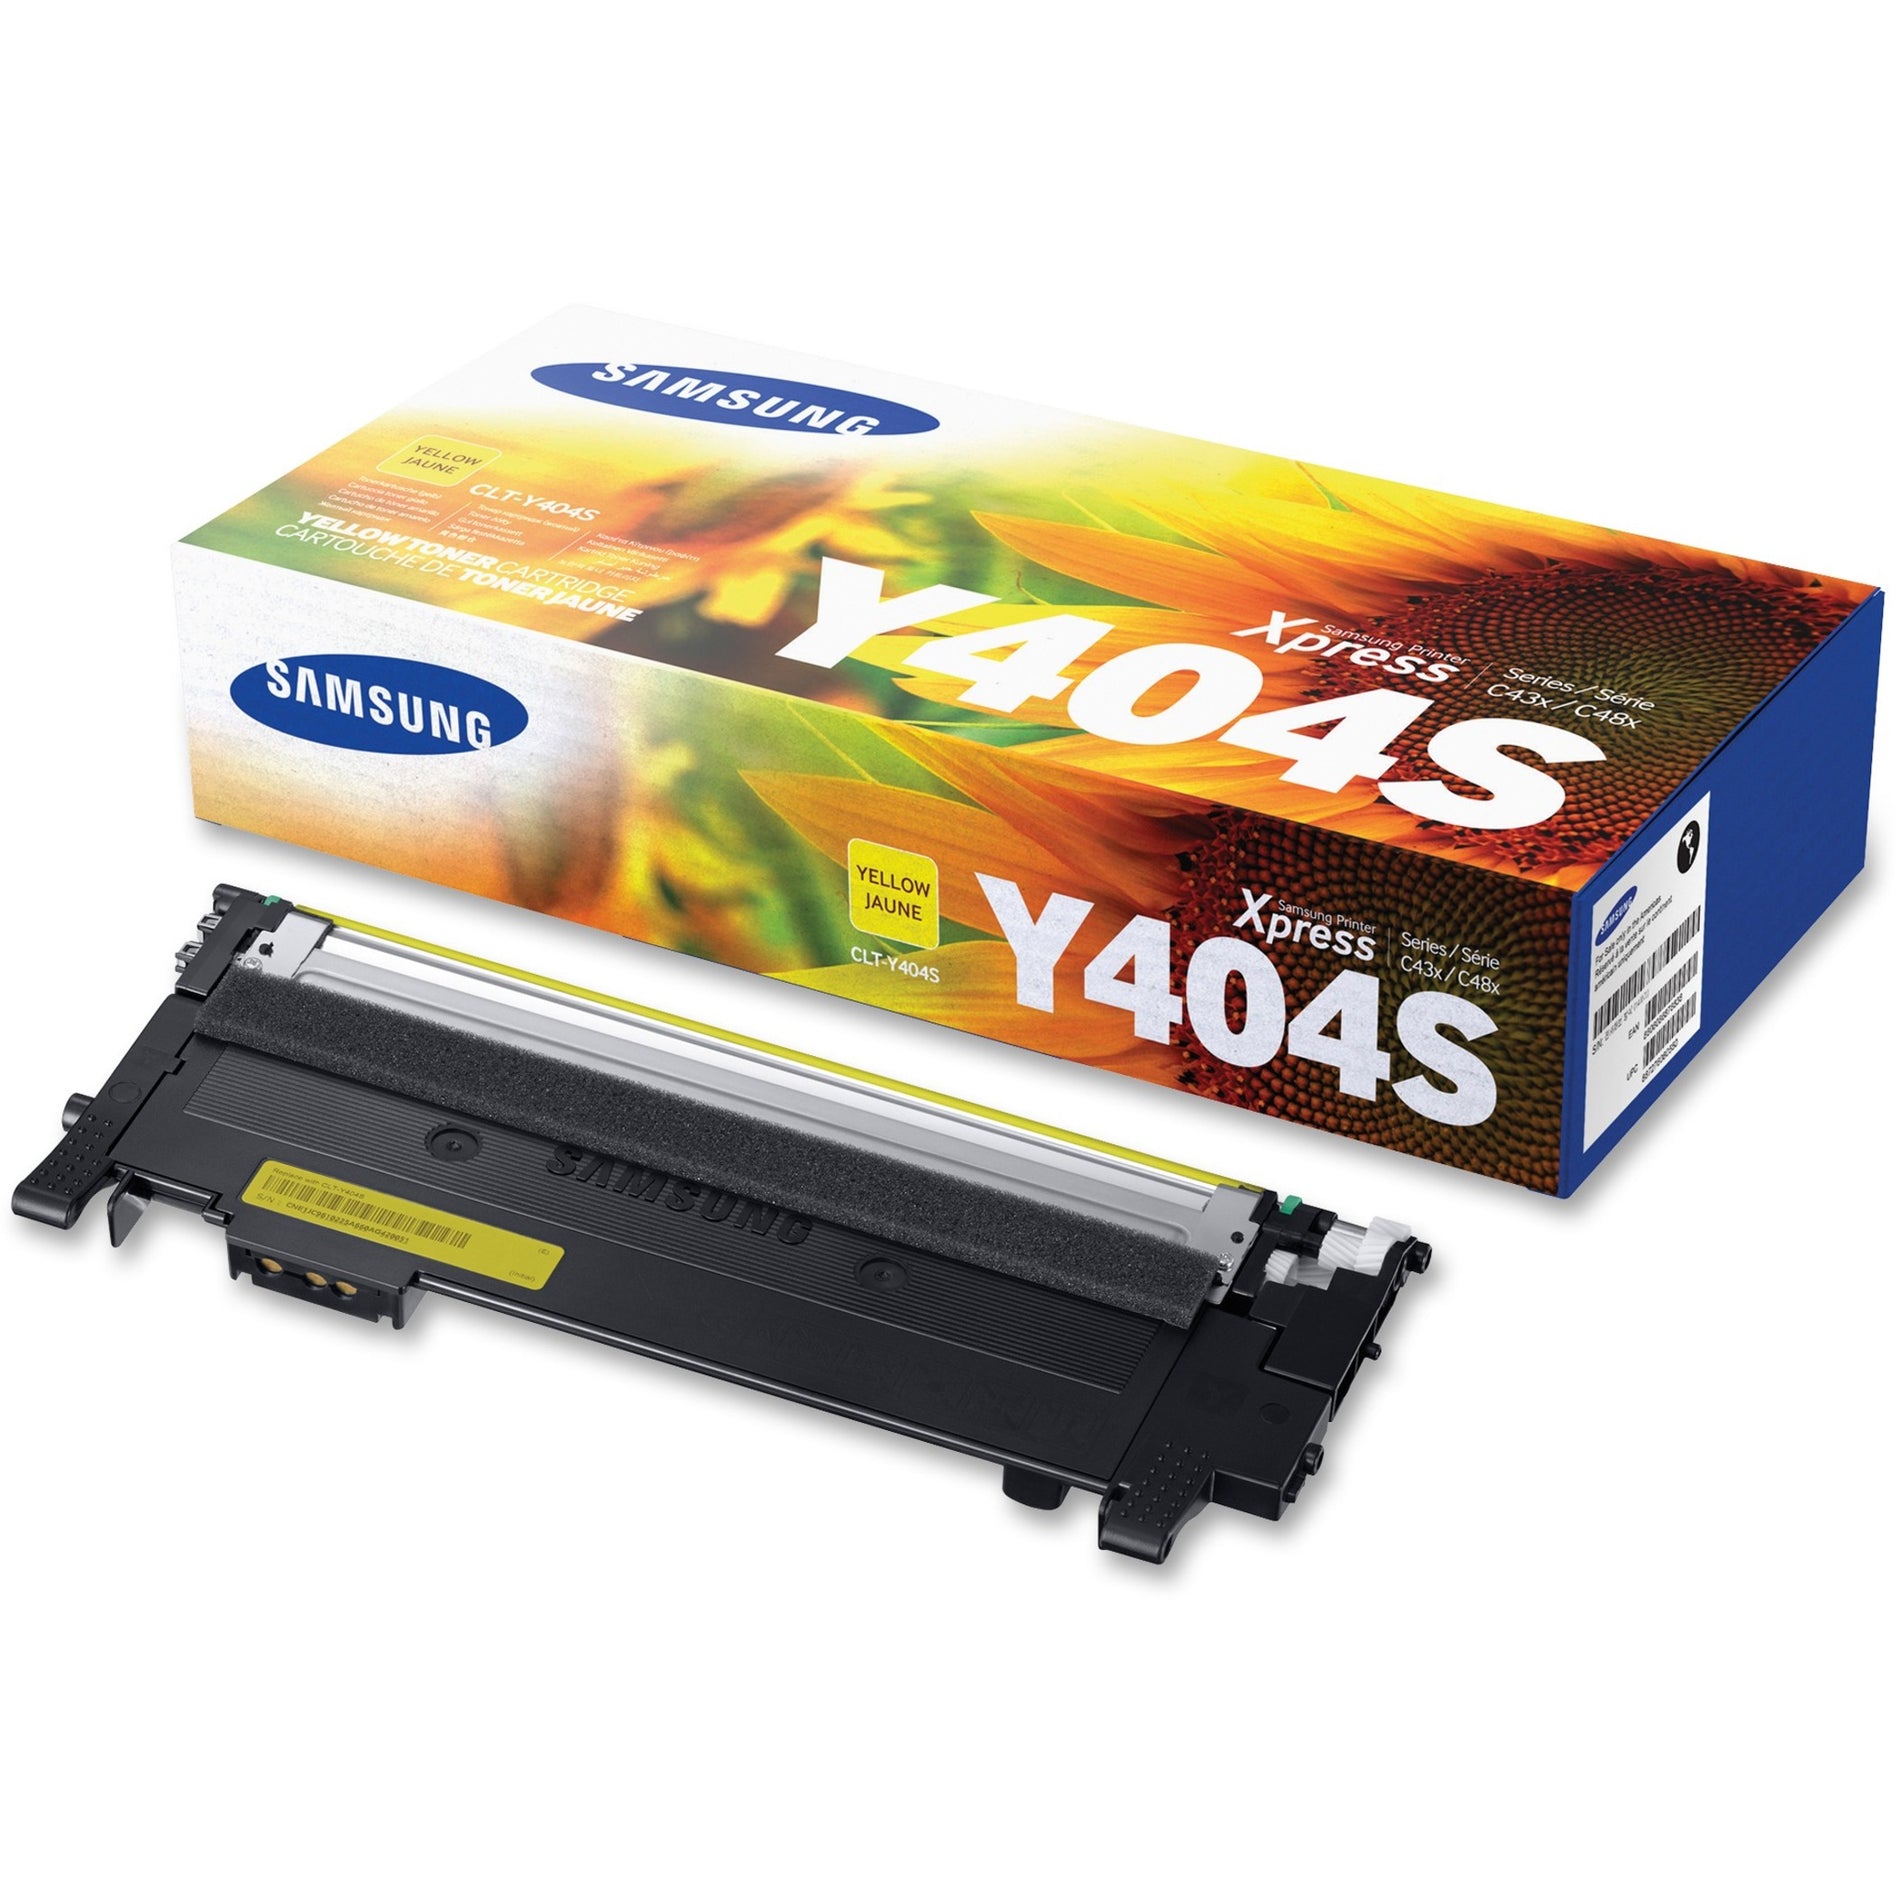 Samsung CLTY404S Xpress C430with C480FW Toner Cartridge, Yellow, 1000 Page Yield